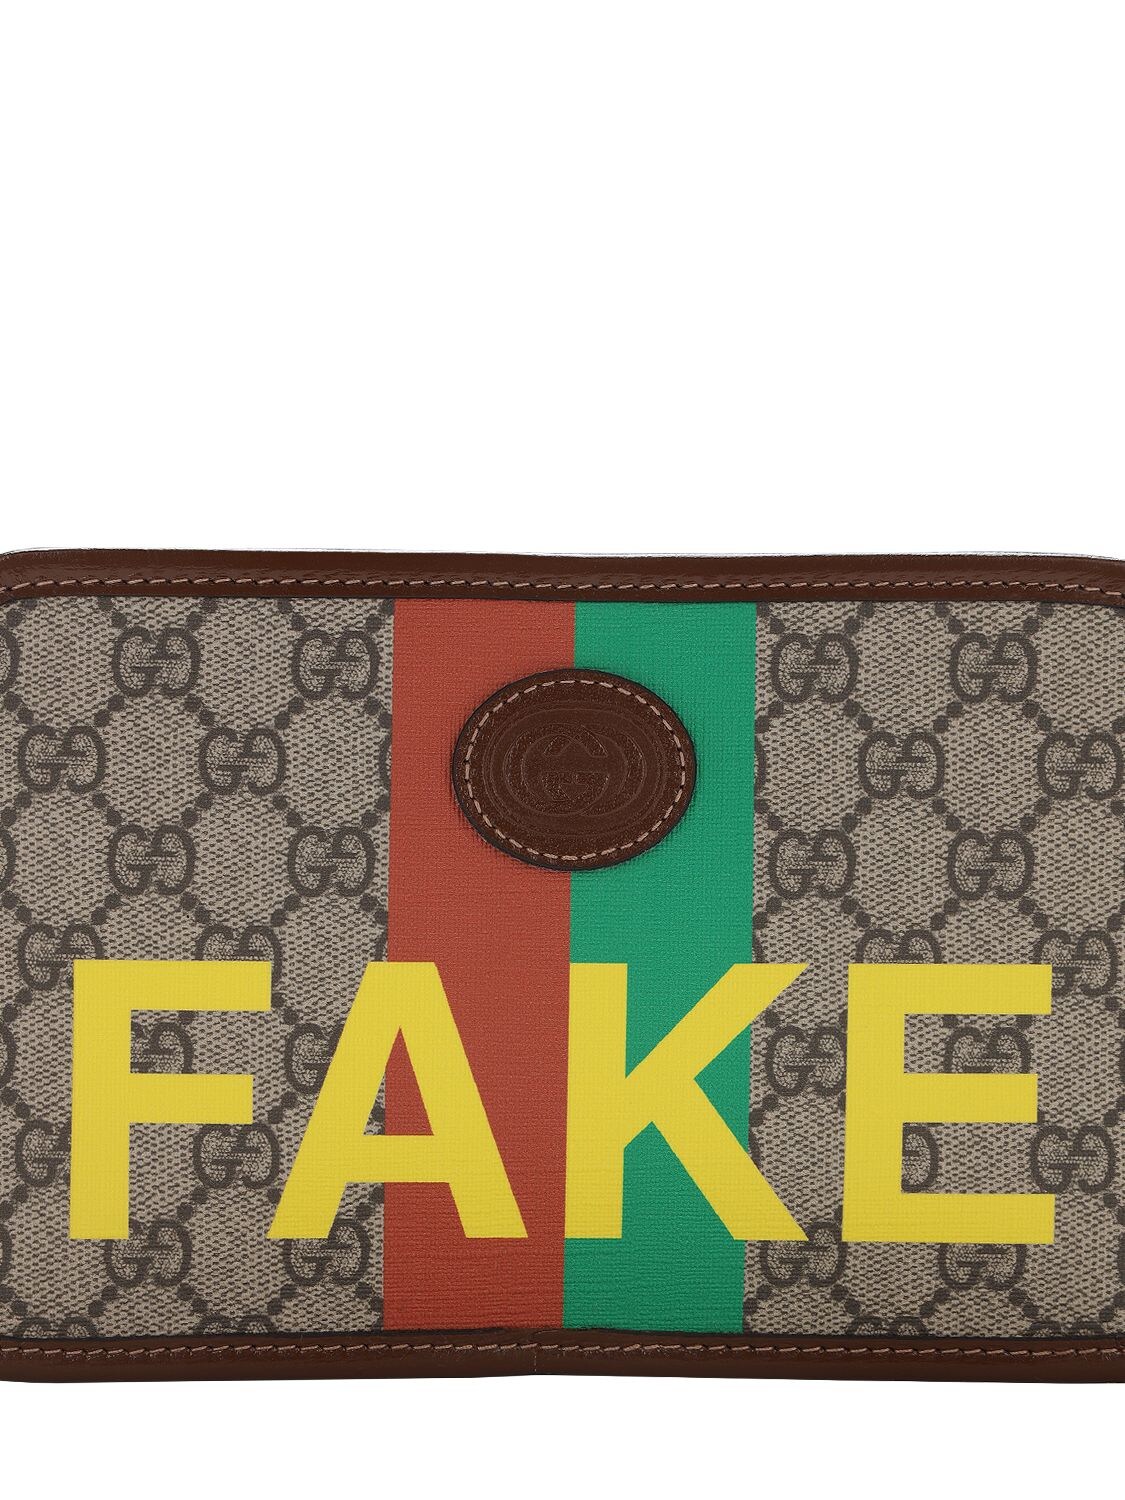 Gucci Gg Supreme Fake Not Toiletry Bag In Beige | ModeSens